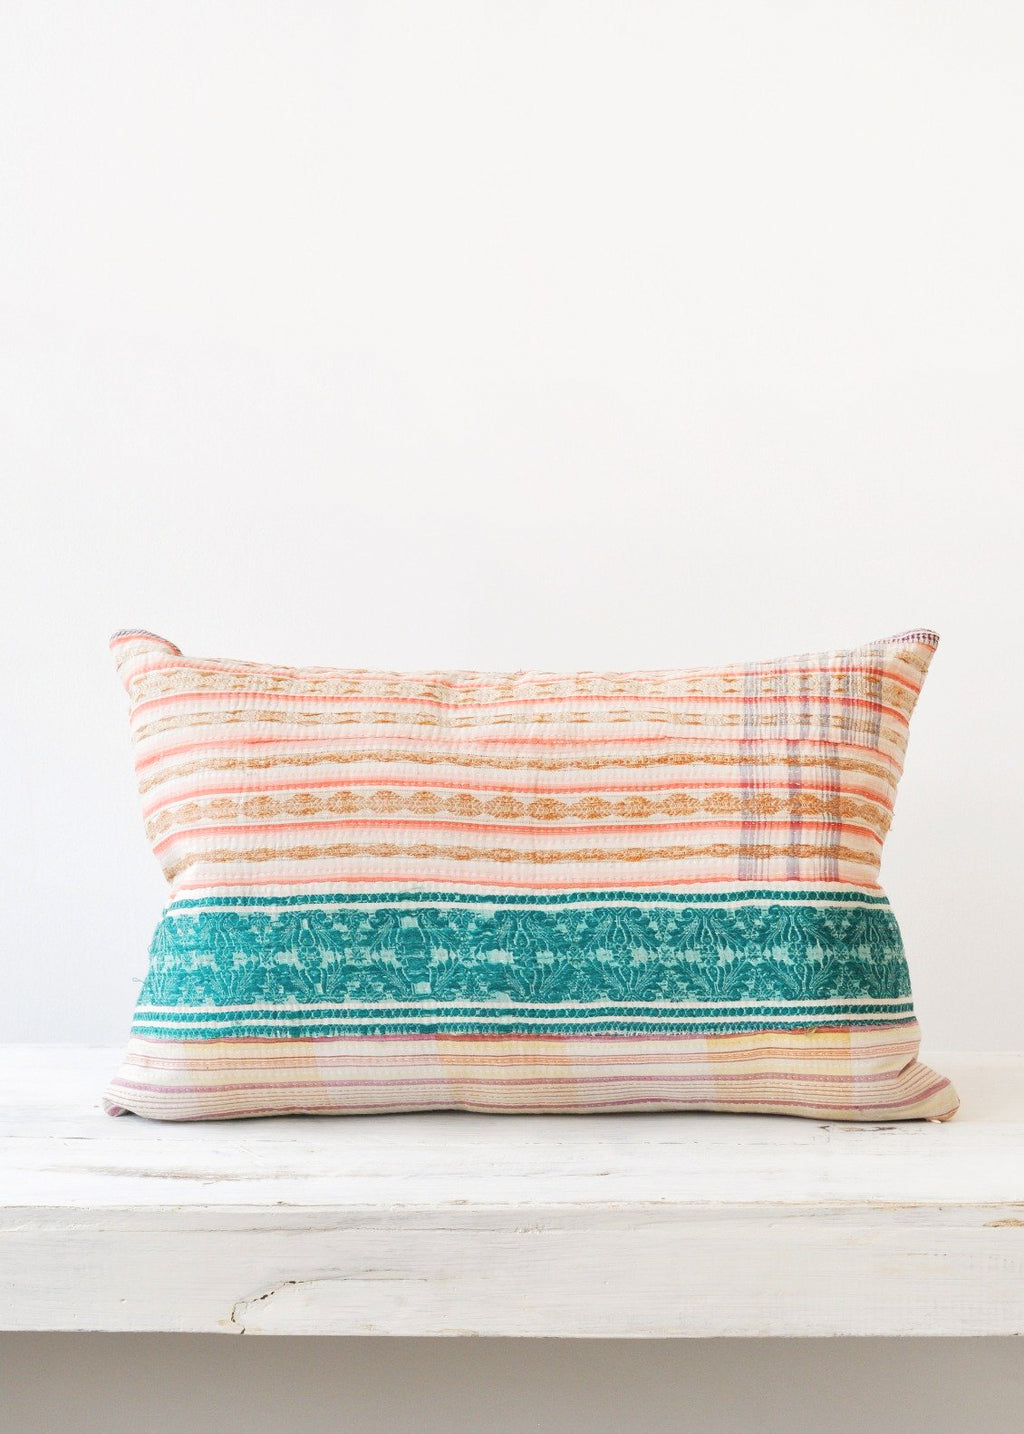 2: A multicolored pillow made of vintage quilt fabric.